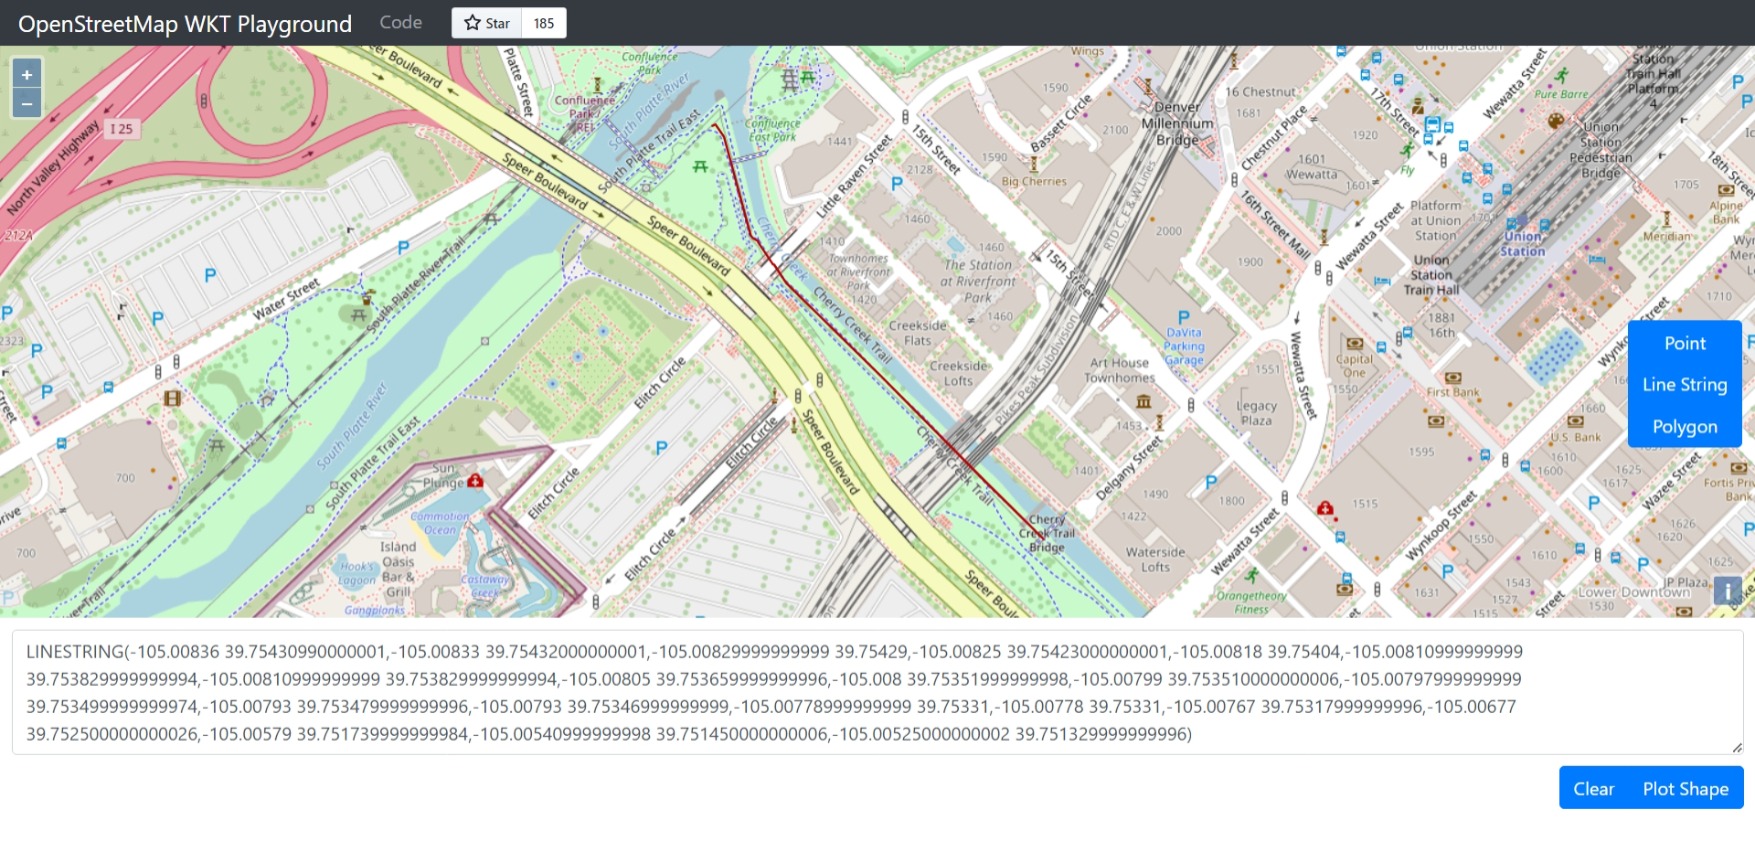 OpenStreetMap WKT Playground: 20 points with LINESTRING